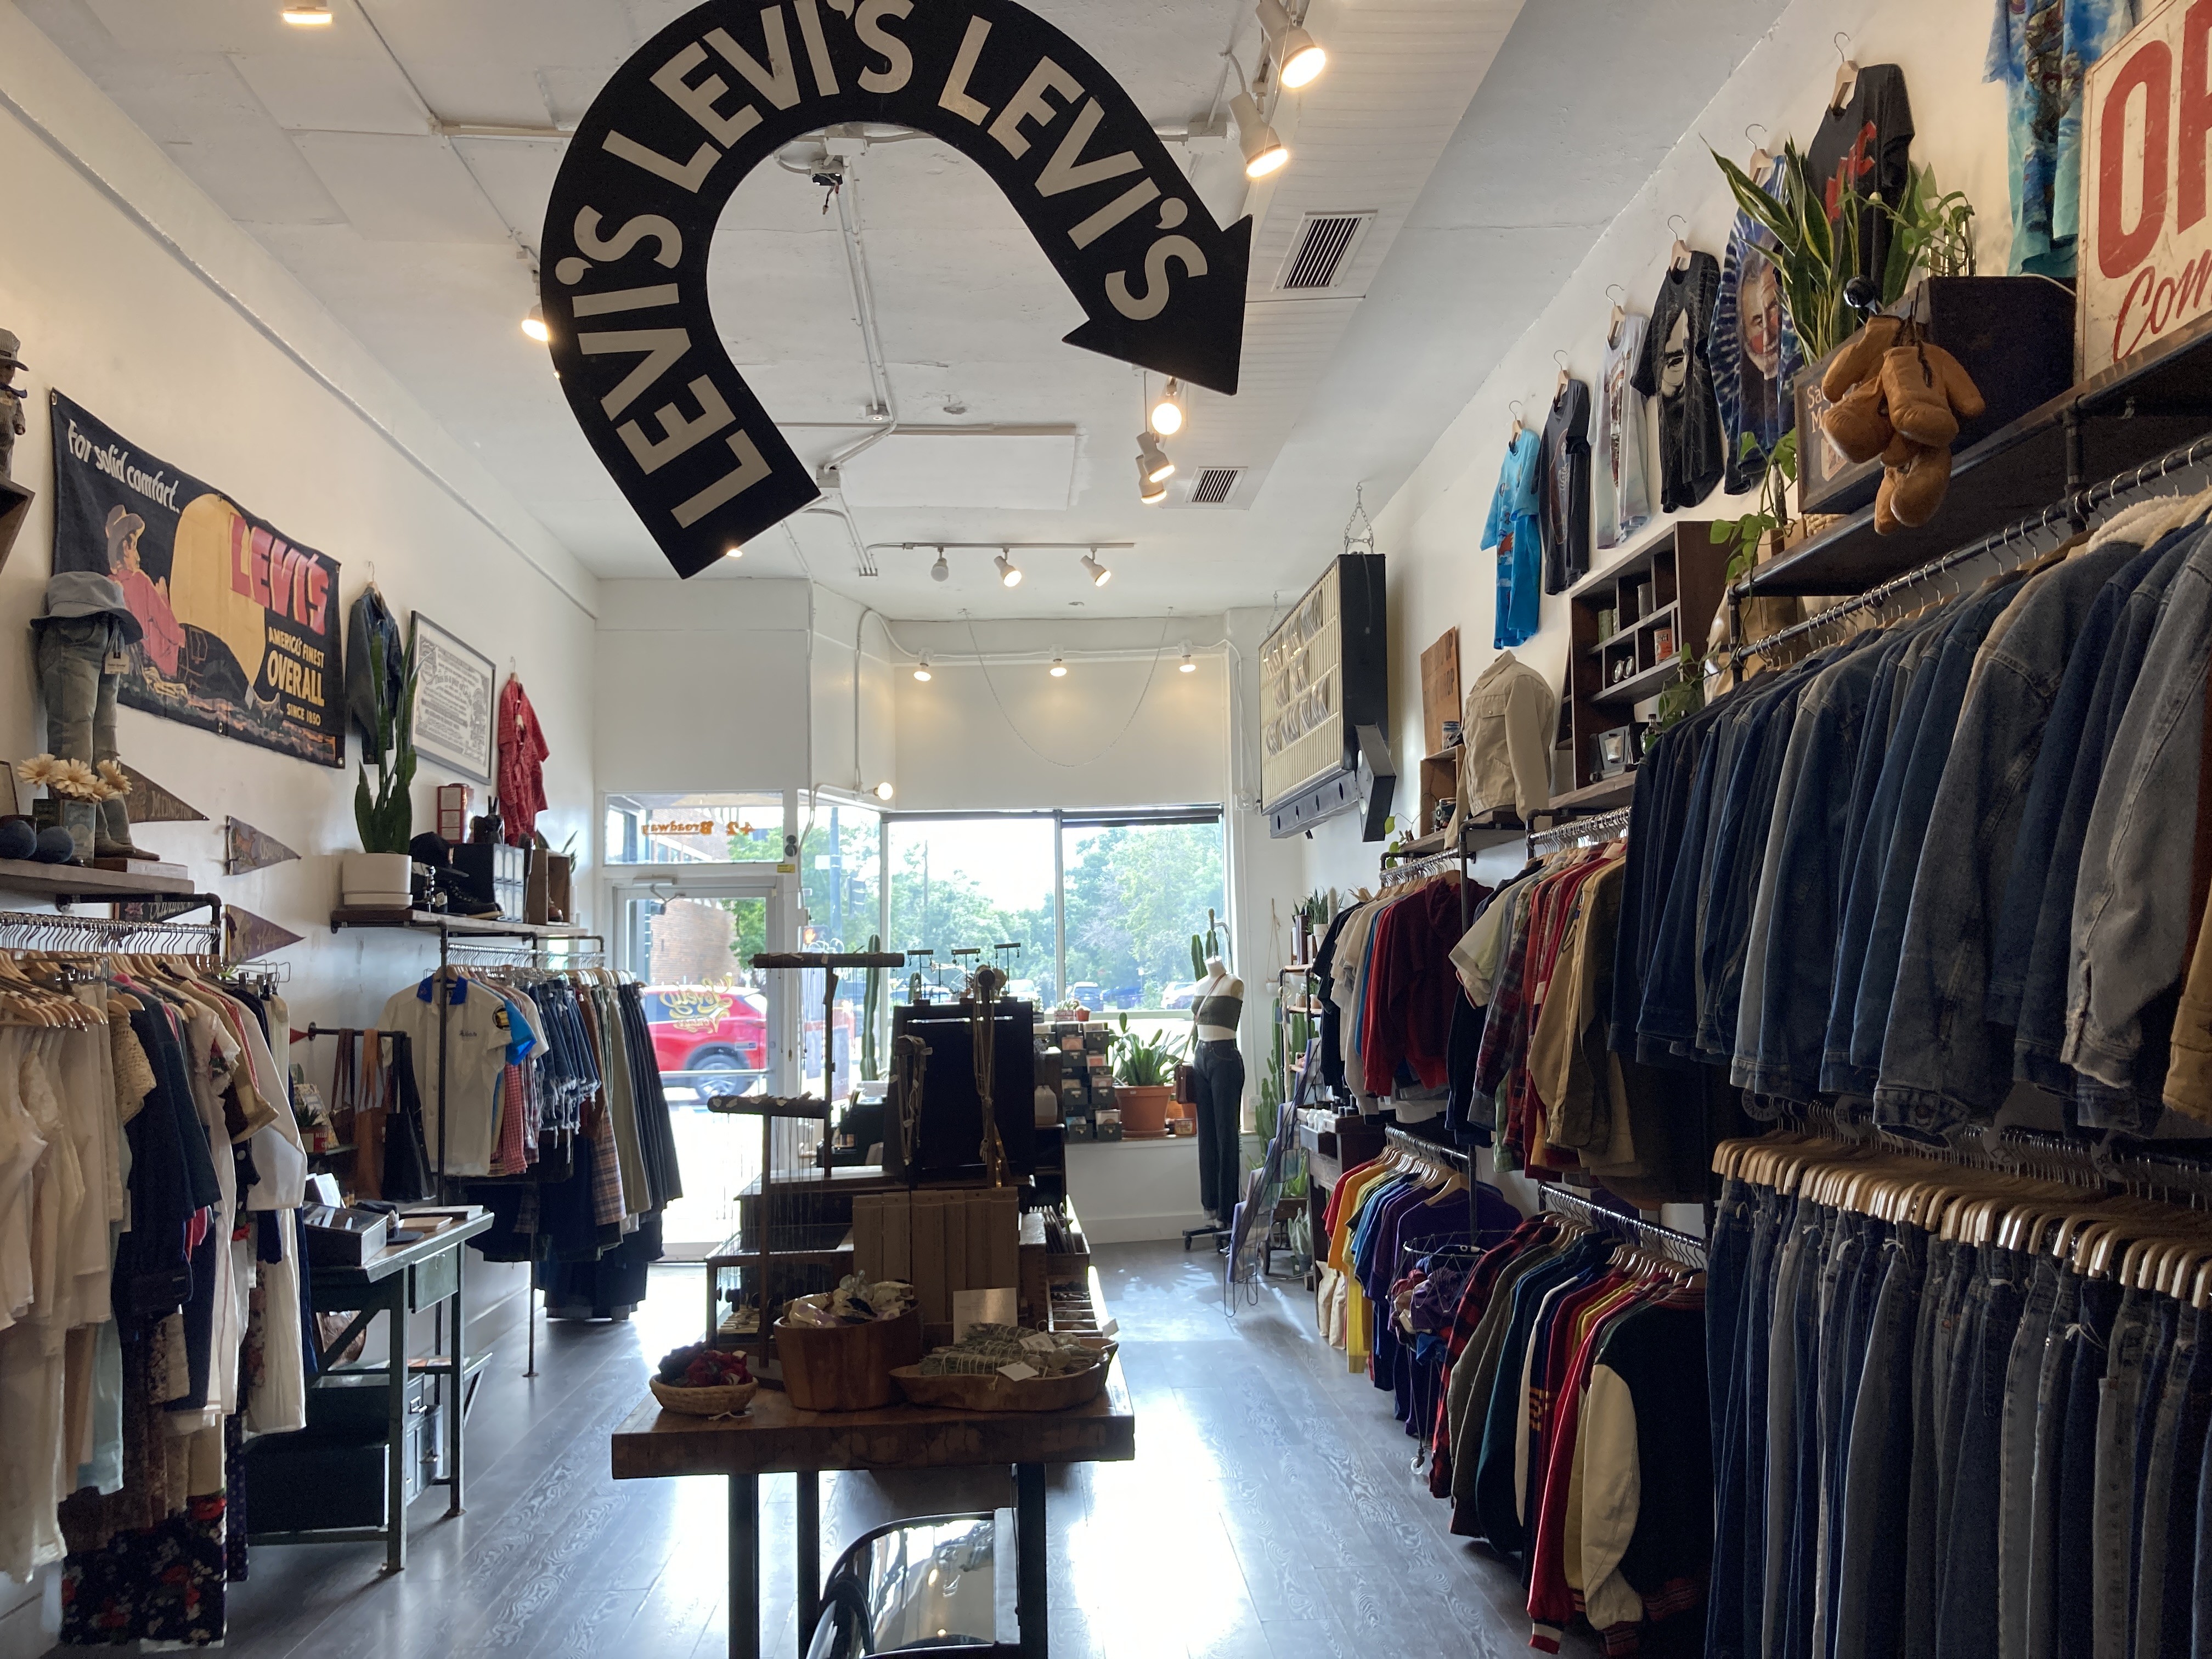 Best Vintage Clothing Store 2018, The Fashionista Consignment Boutique, Best Restaurants, Bars, Clubs, Music and Stores in Miami